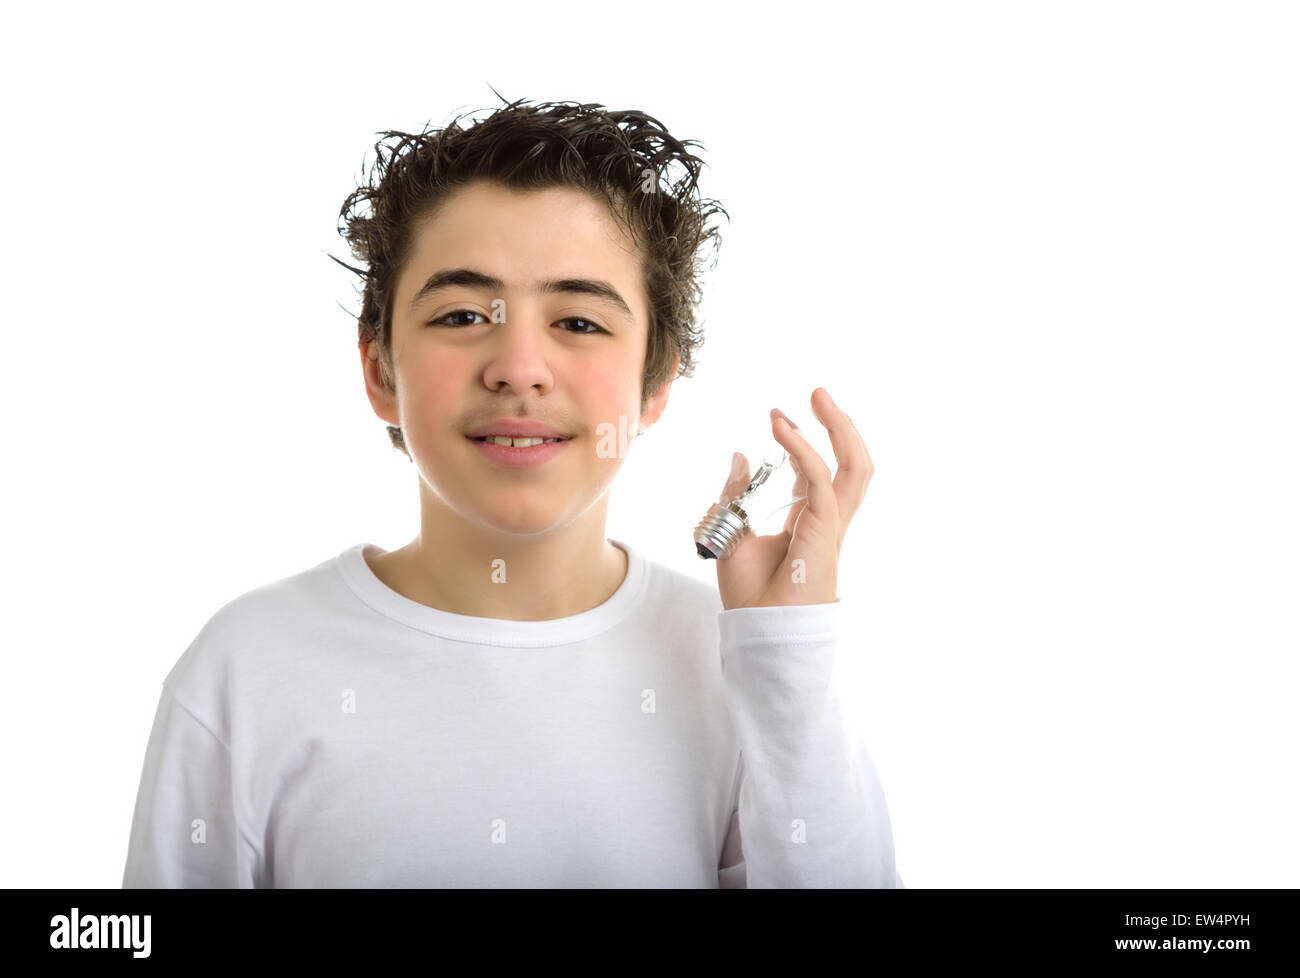 Handsome hispanic boy in white long sleeved t-shirt is holding a lightbulb in the same way as he's going to listen to it Stock Photo